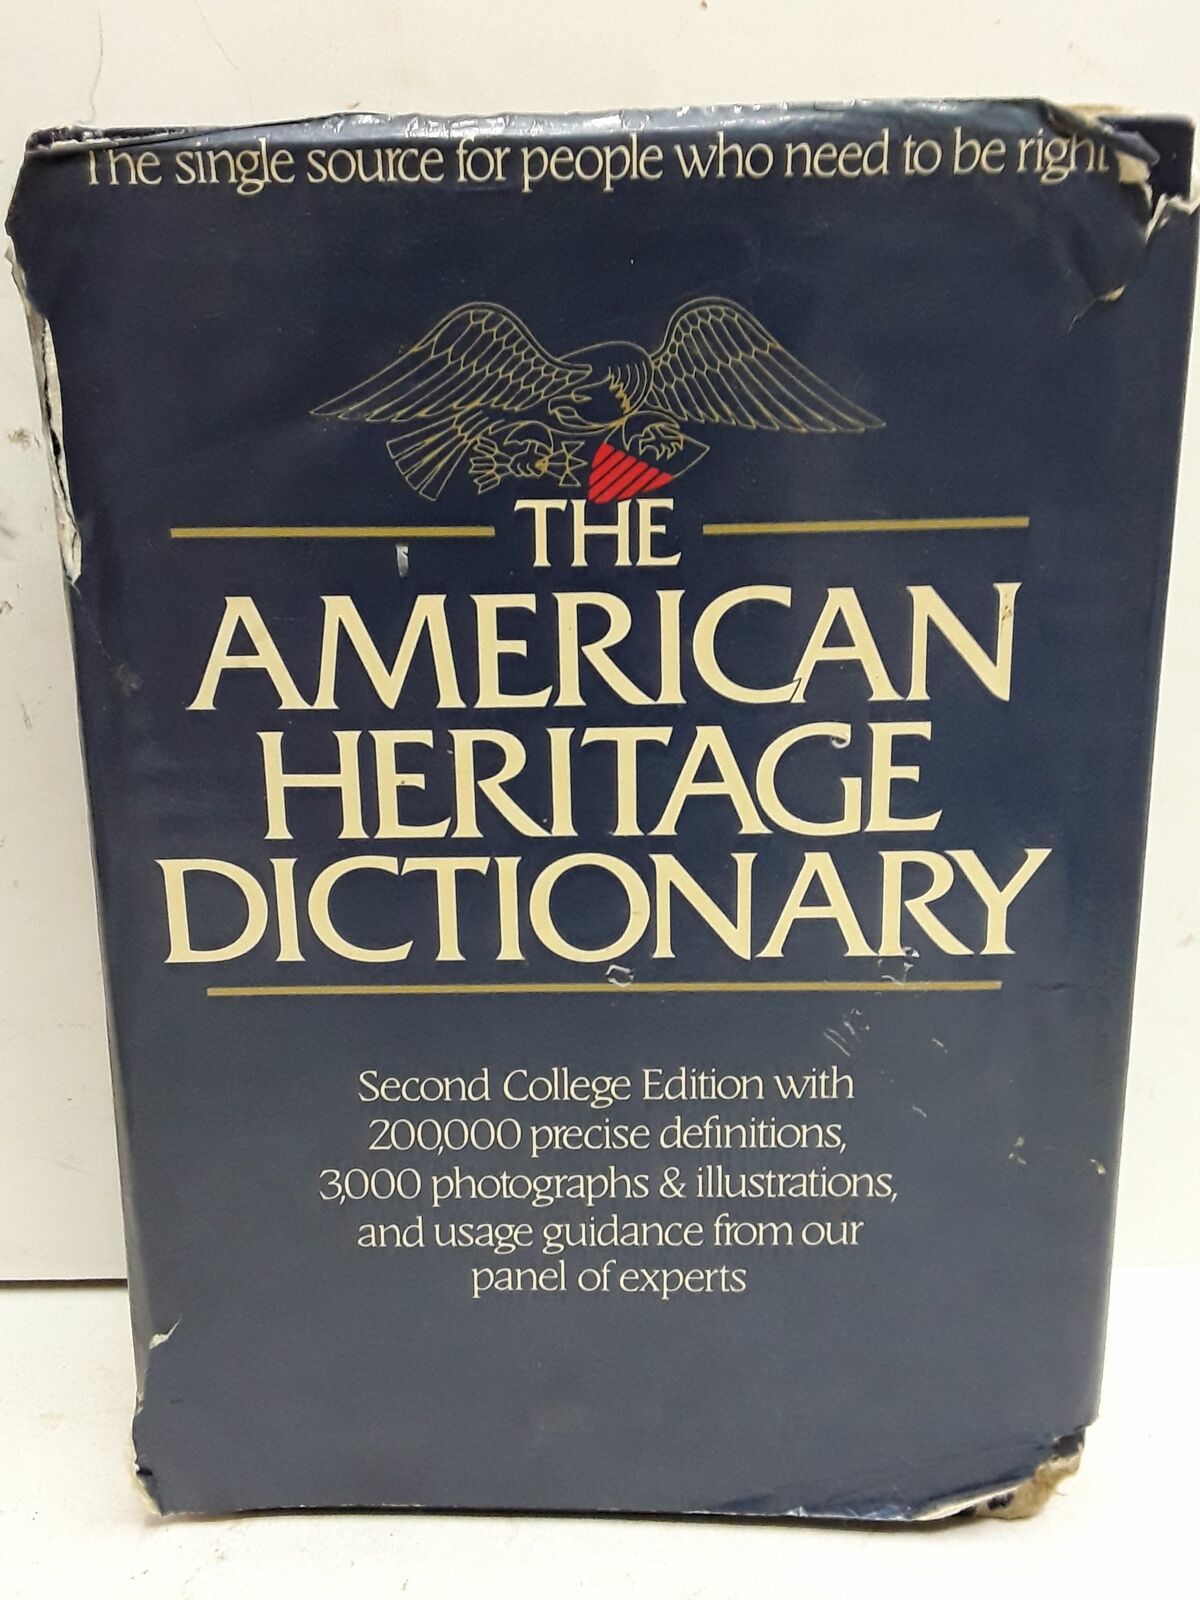 Two dictionary. American Heritage Dictionary. American Heritage Dictionary 5 Edition. The American Heritage Dictionary of the English language книга купить. American Heritage New Dictionary of Cultural Literacy,.